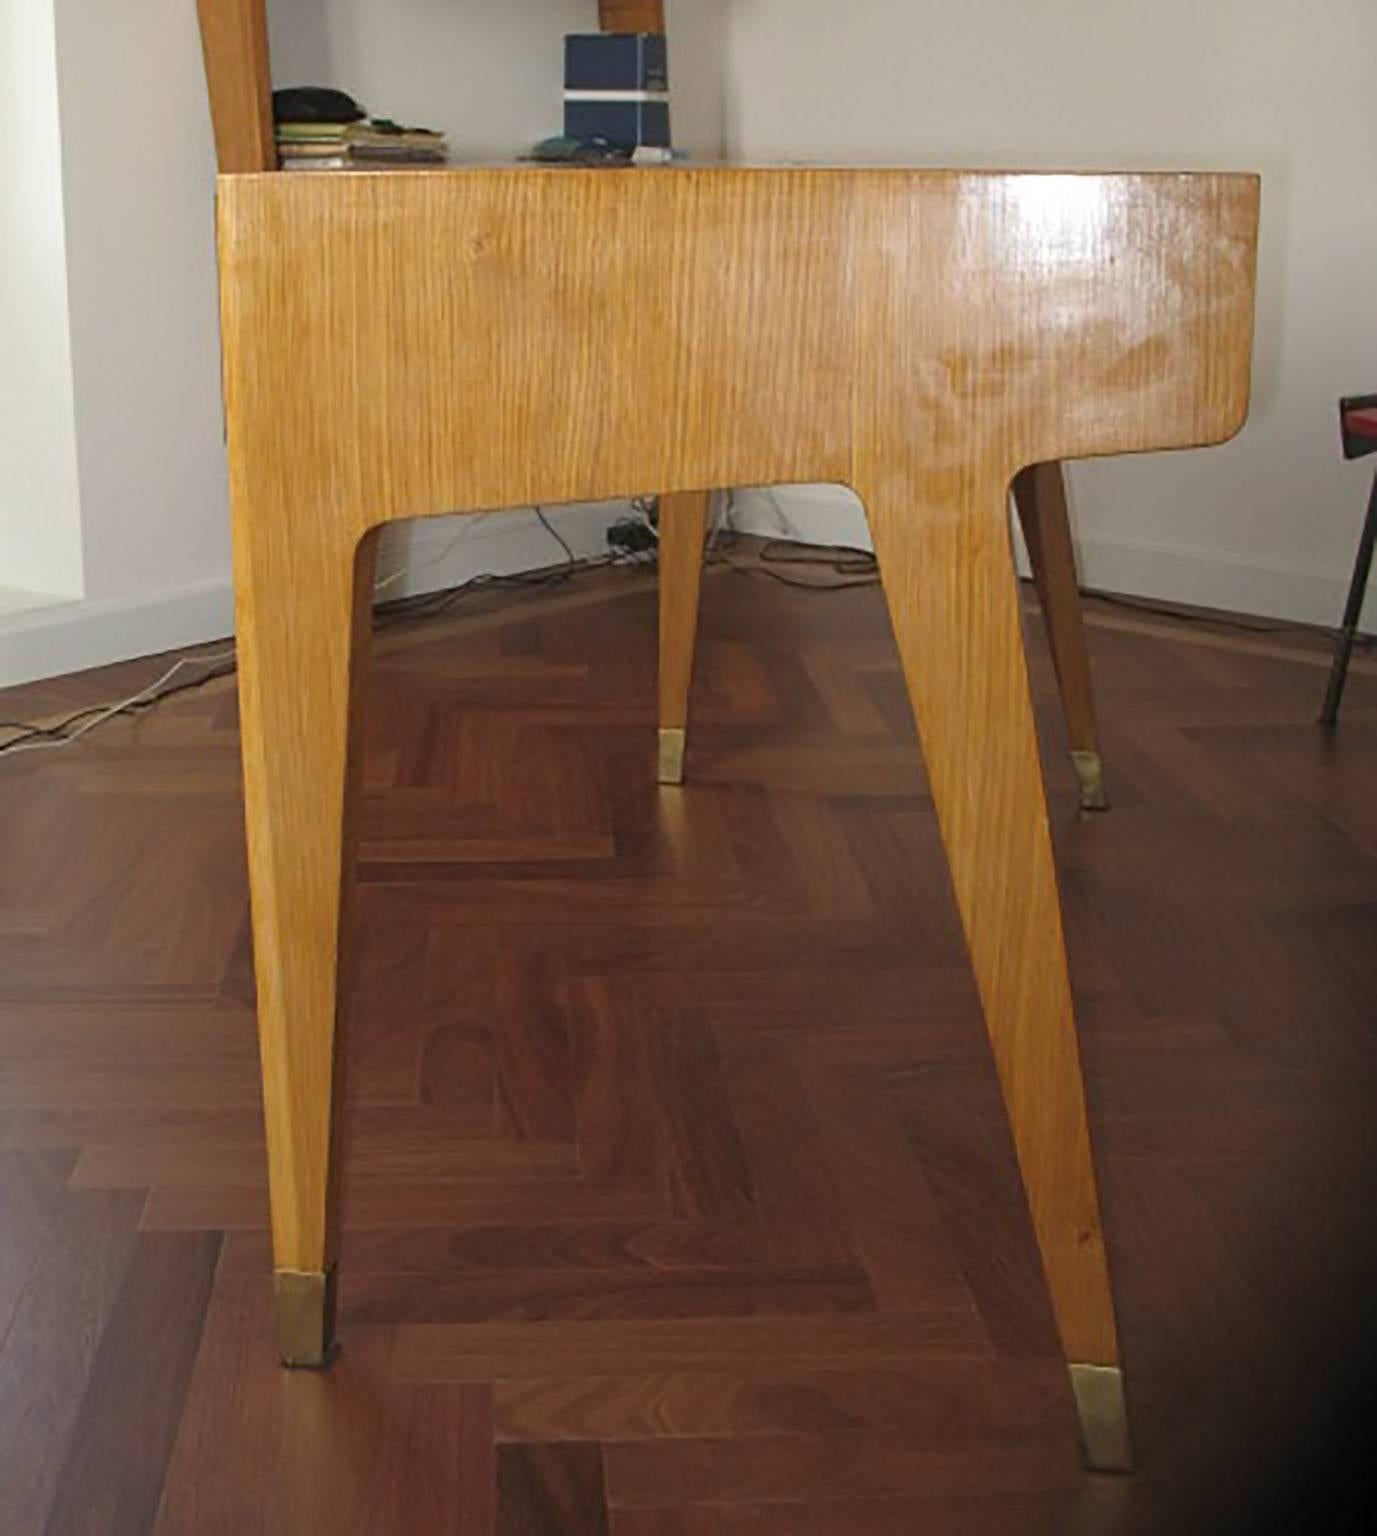 Elegant desk designed by Gio Ponti in 1950.
Ashwood with two drawers and brass feet.
Gio Ponti Archives certification.